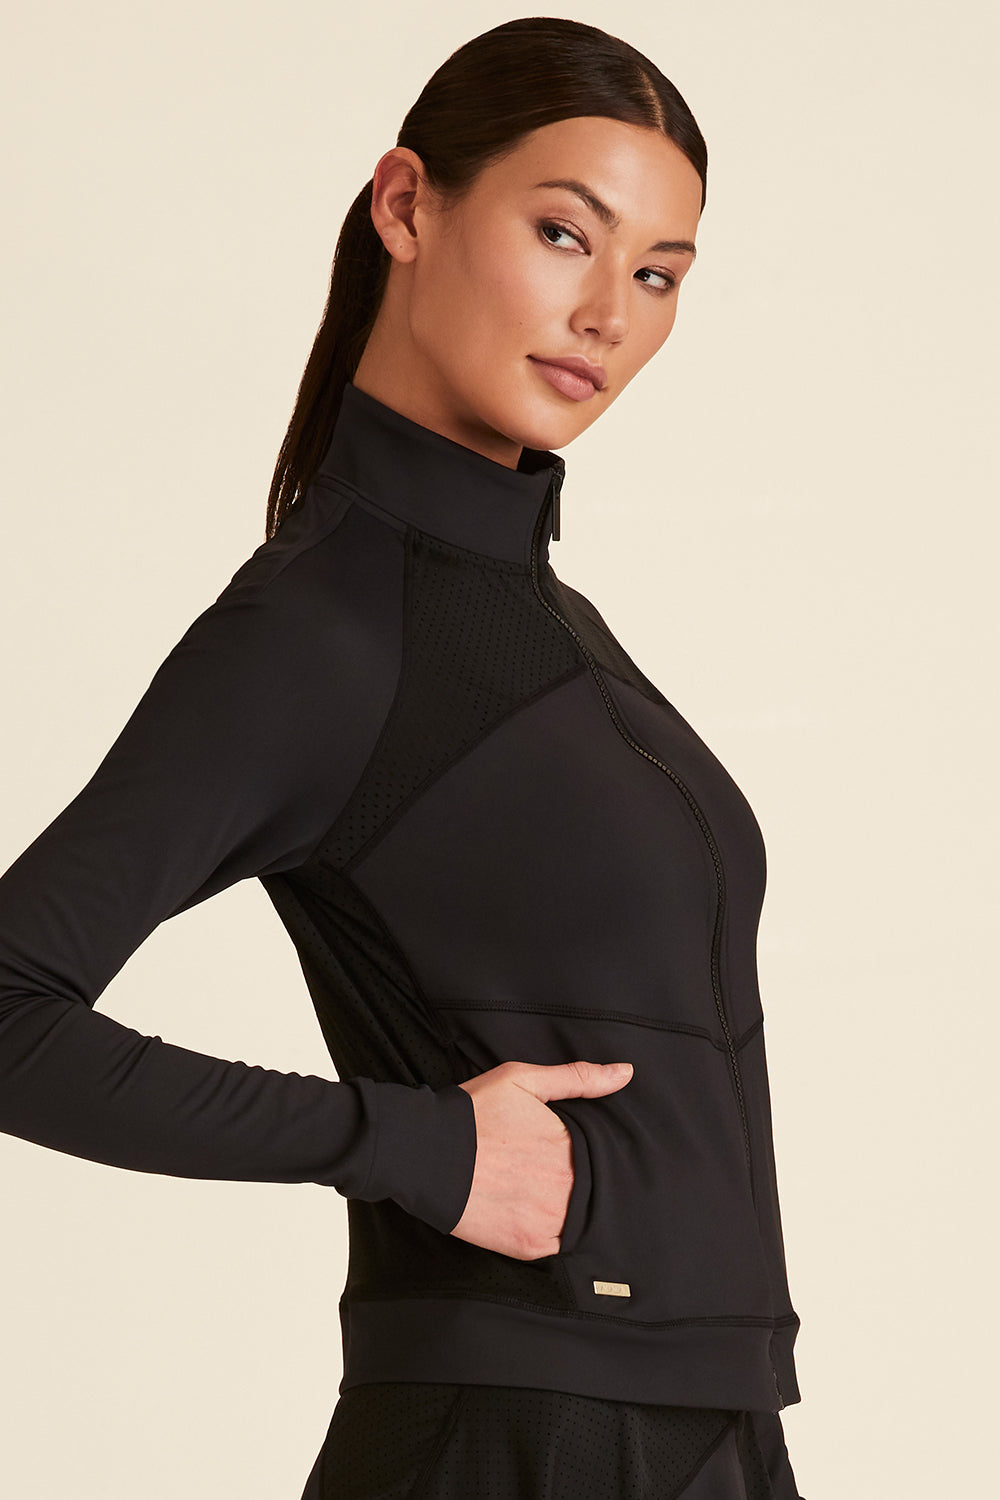 Black tennis jacket for women from Alala activewear